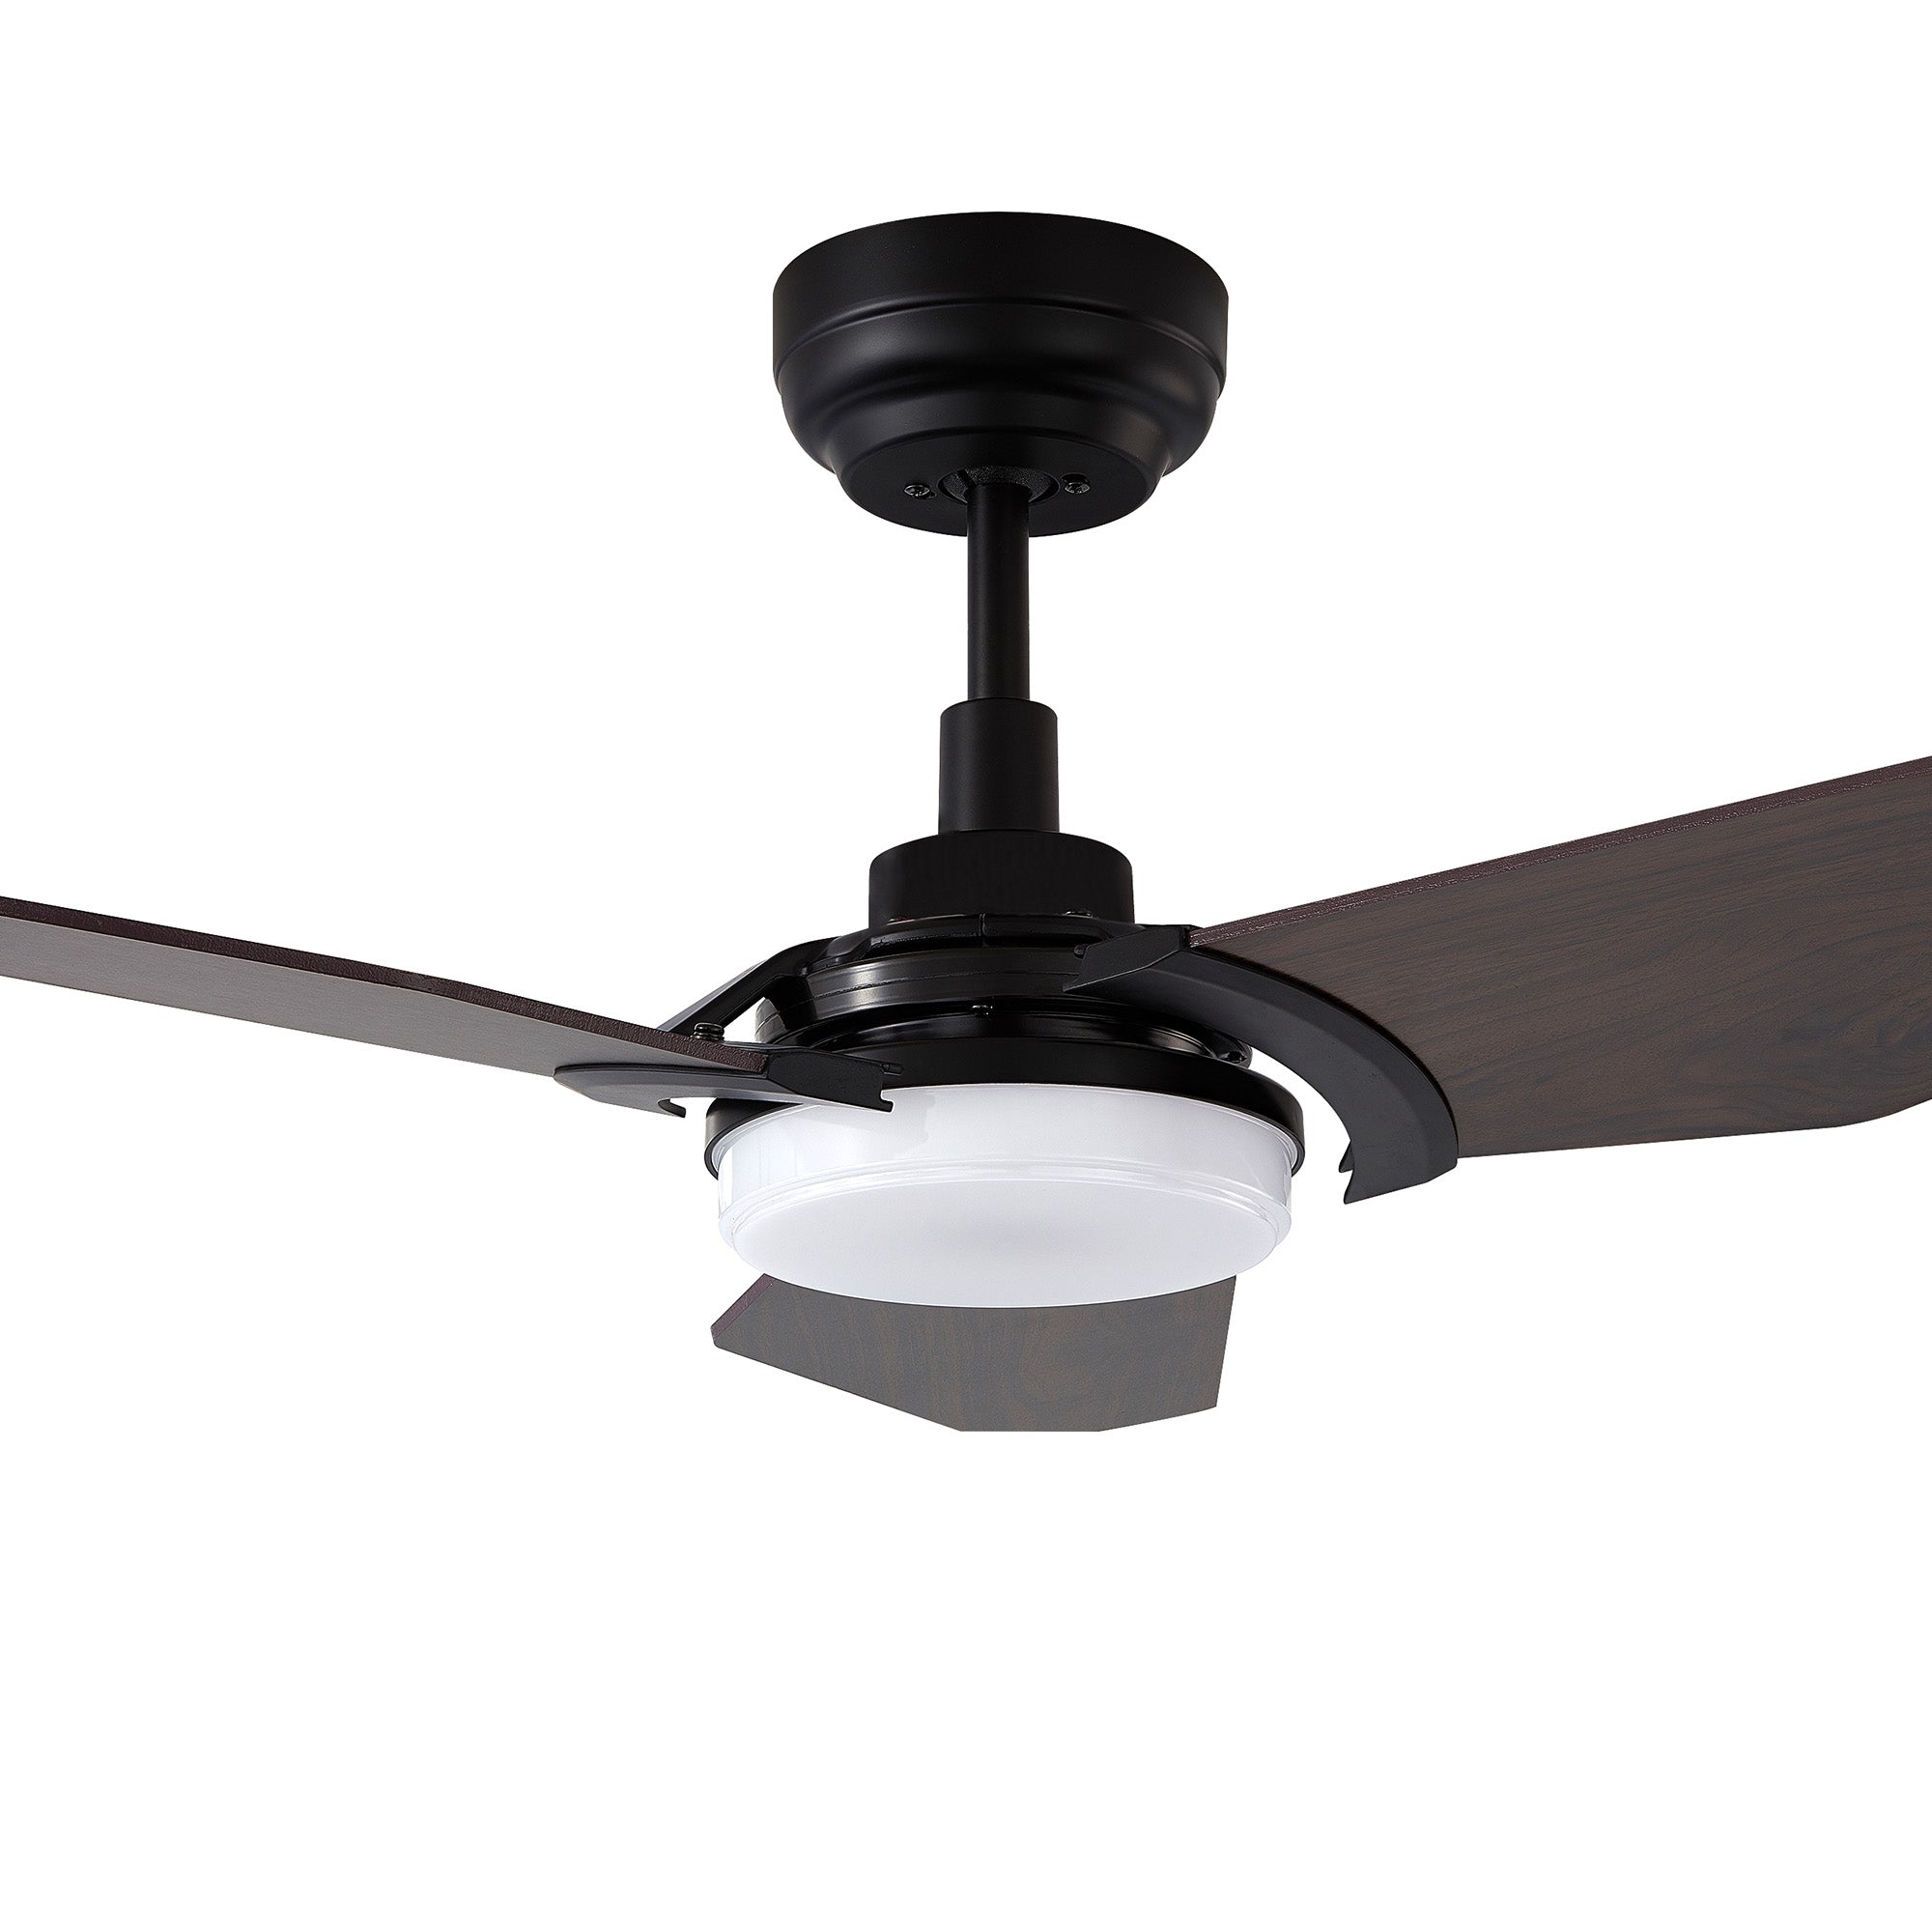 The Smafan Trailblazer 56'' Smart Fan’s sleek and stylish design fits perfectly with any décor trend. With a fully dimmable, and energy-efficient LED kit, whisper-quiet operation#color_Dark-Wood